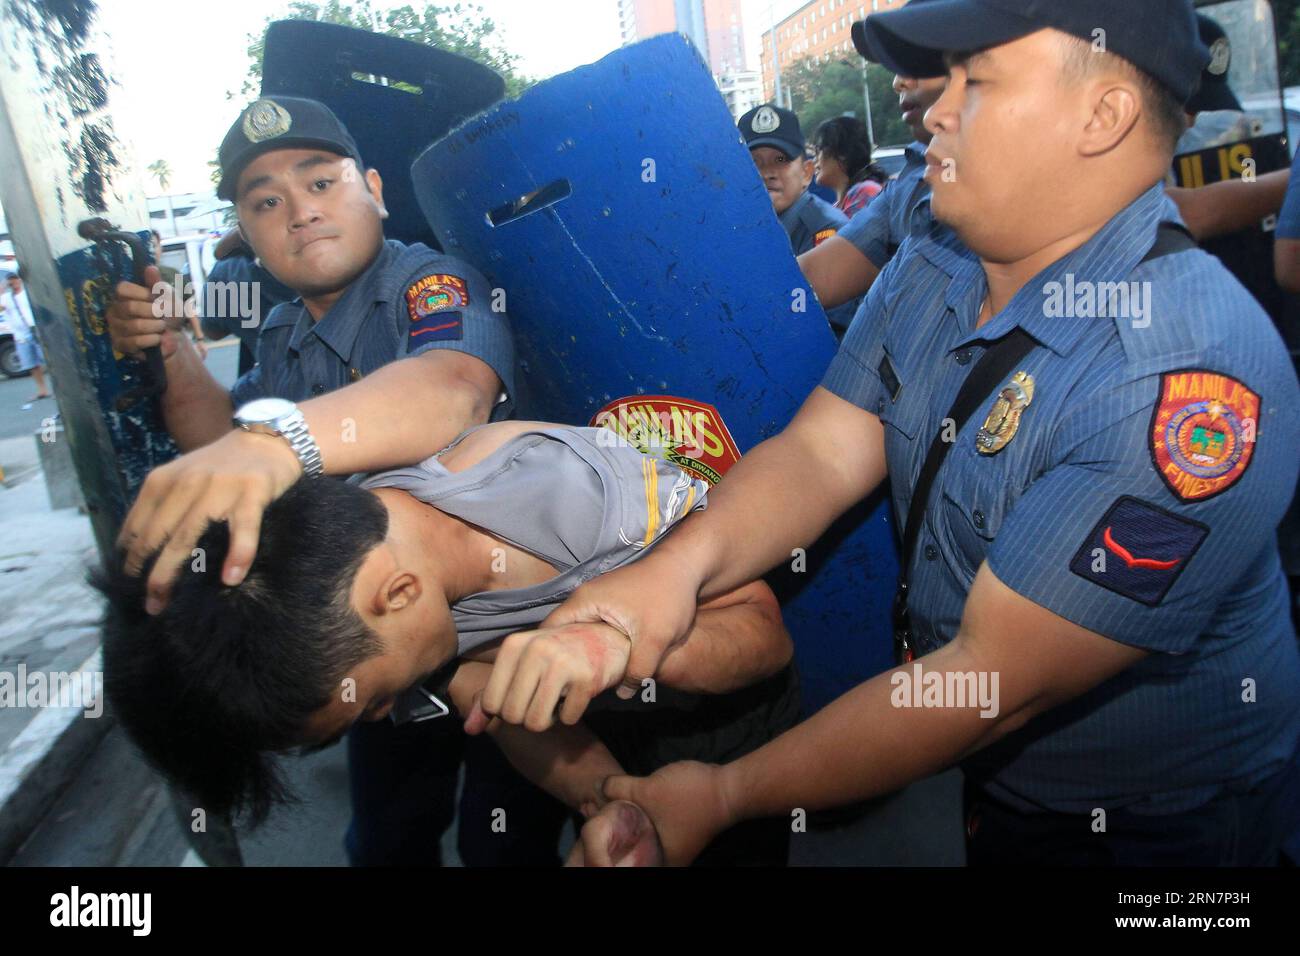 (150916) -- MANILA, Sept. 16, 2015 -- Policemen arrest an activist during a lightning protest rally in front of the U.S. Embassy in Manila, the Philippines, Sept. 16, 2015. A protest was held here on Wednesday to call for an end to the Enhanced Defense Cooperation Agreement (EDCA) between the Philippines and the U.S.. ) (zjy) PHILIPPINES-MANILA-U.S. EMBASSY-PROTEST RALLY RouellexUmali PUBLICATIONxNOTxINxCHN   Manila Sept 16 2015 Policemen Arrest to Activist during a Lightning Protest Rally in Front of The U S Embassy in Manila The Philippines Sept 16 2015 a Protest what Hero Here ON Wednesday Stock Photo